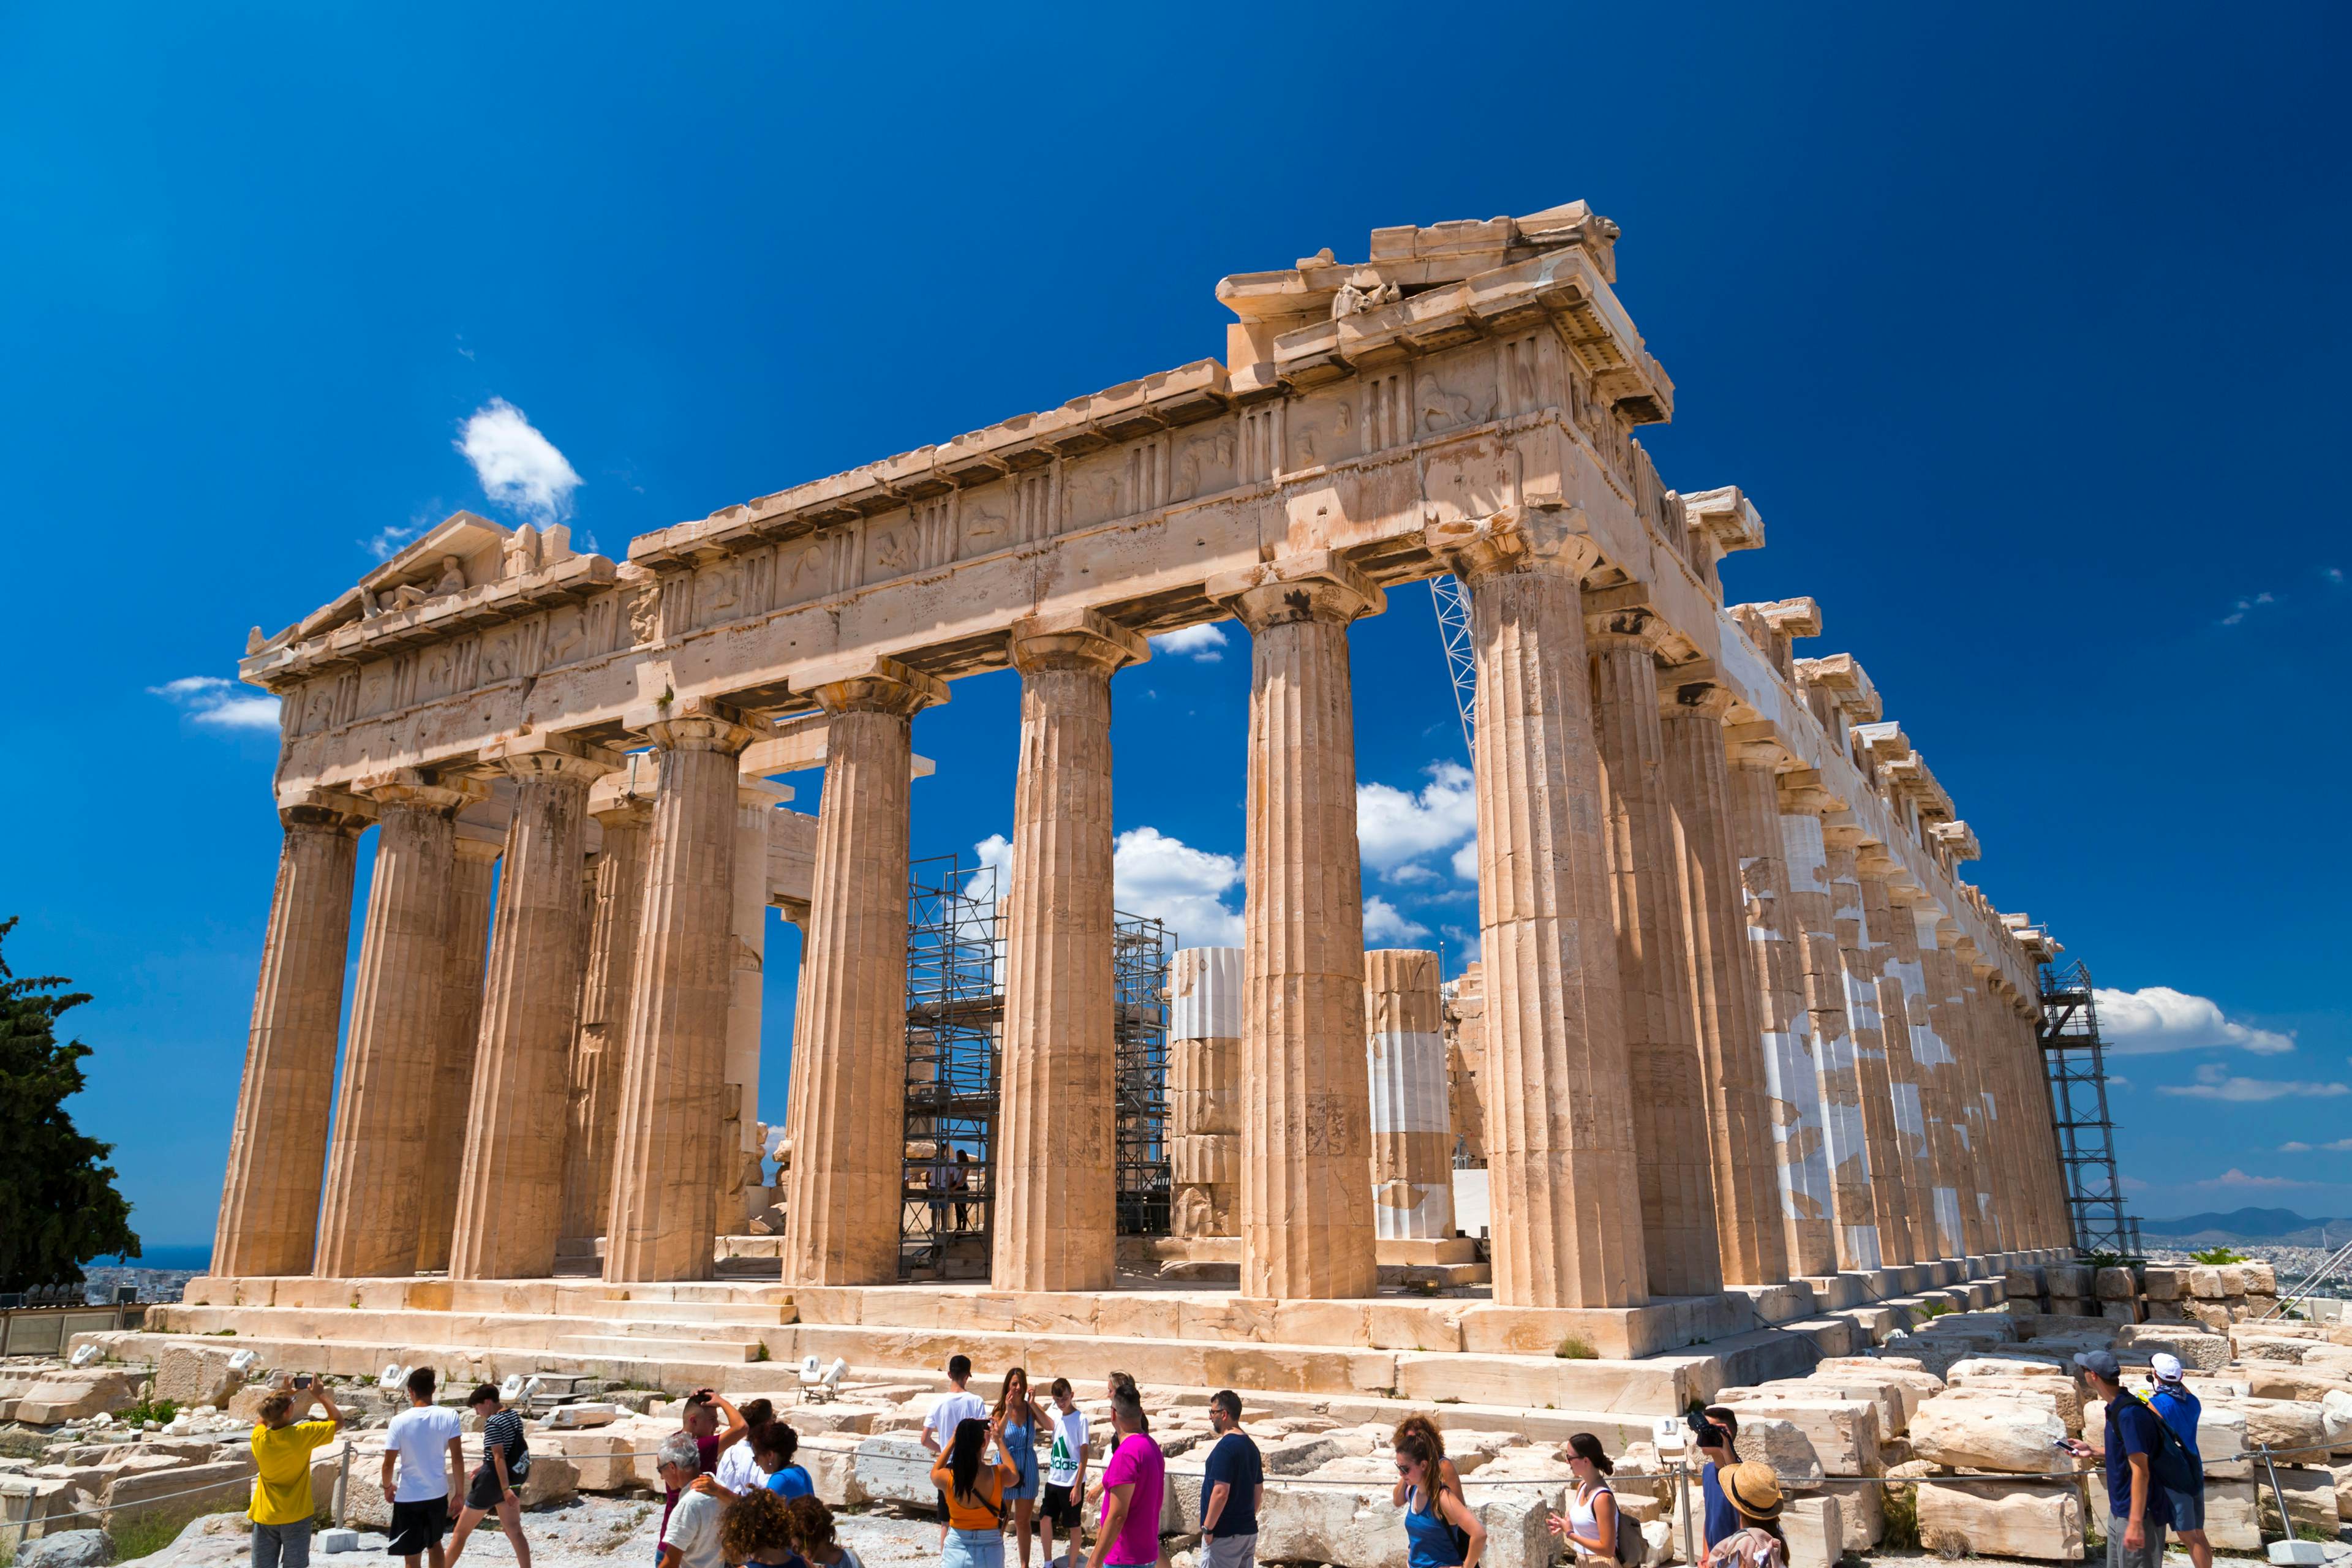 Acropolis: Following the route of Parthenon in Ancient Athens. image